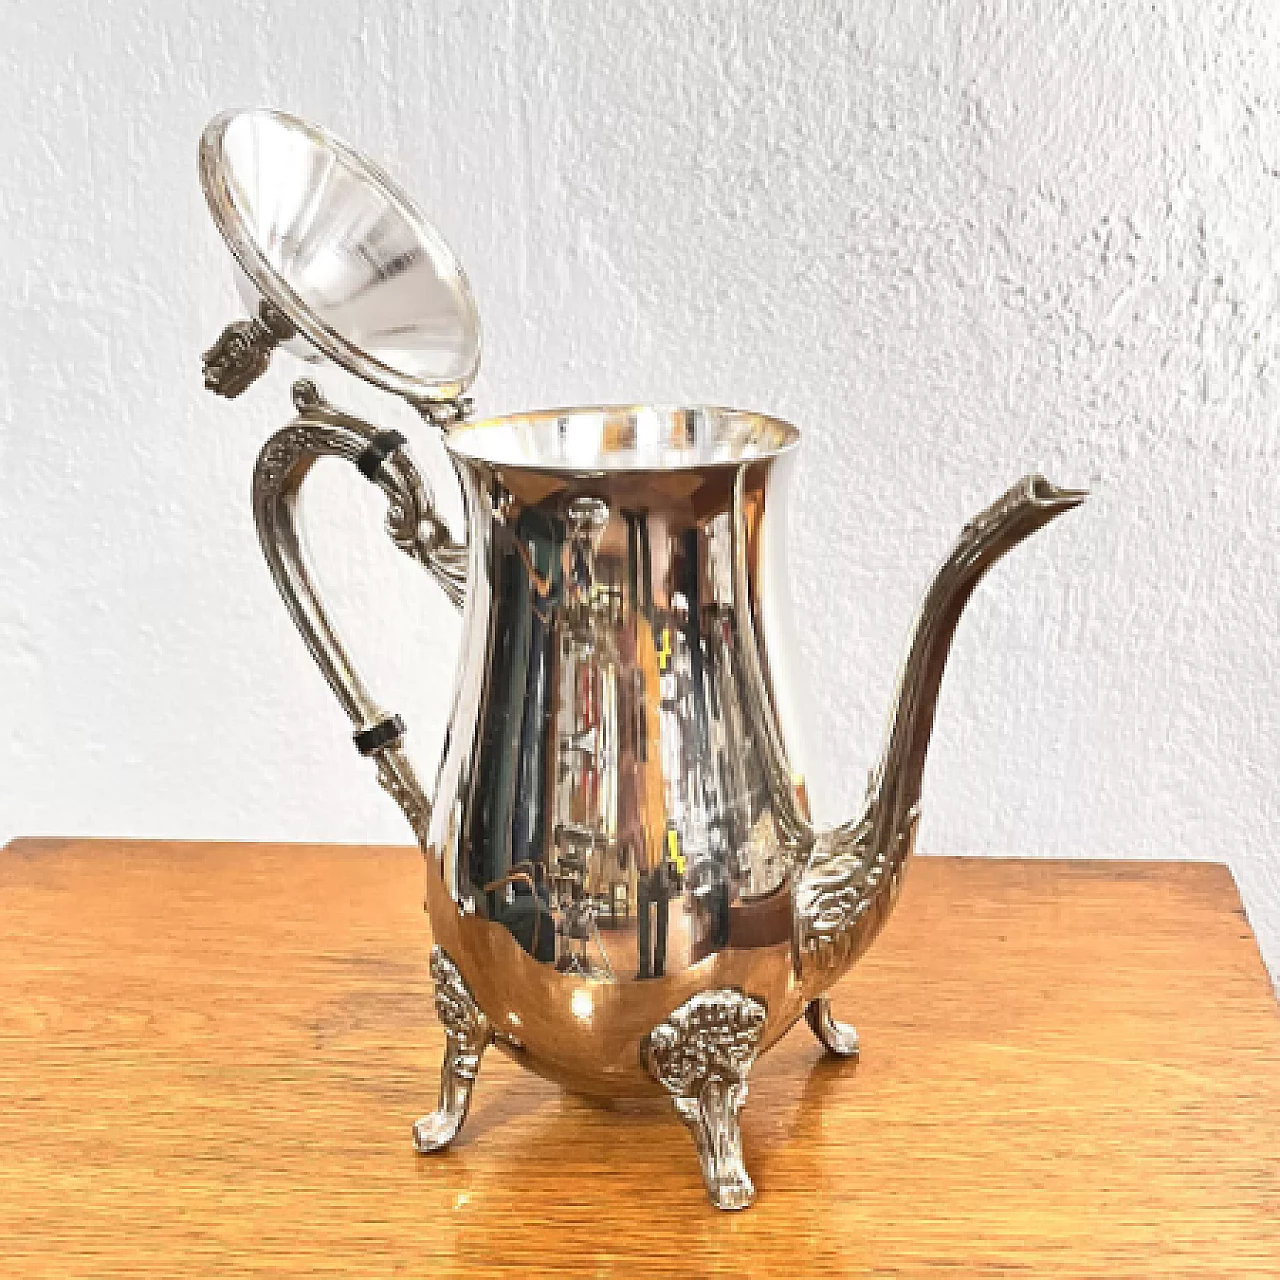 English Art Deco silver-plated brass teapot, 1940s 8